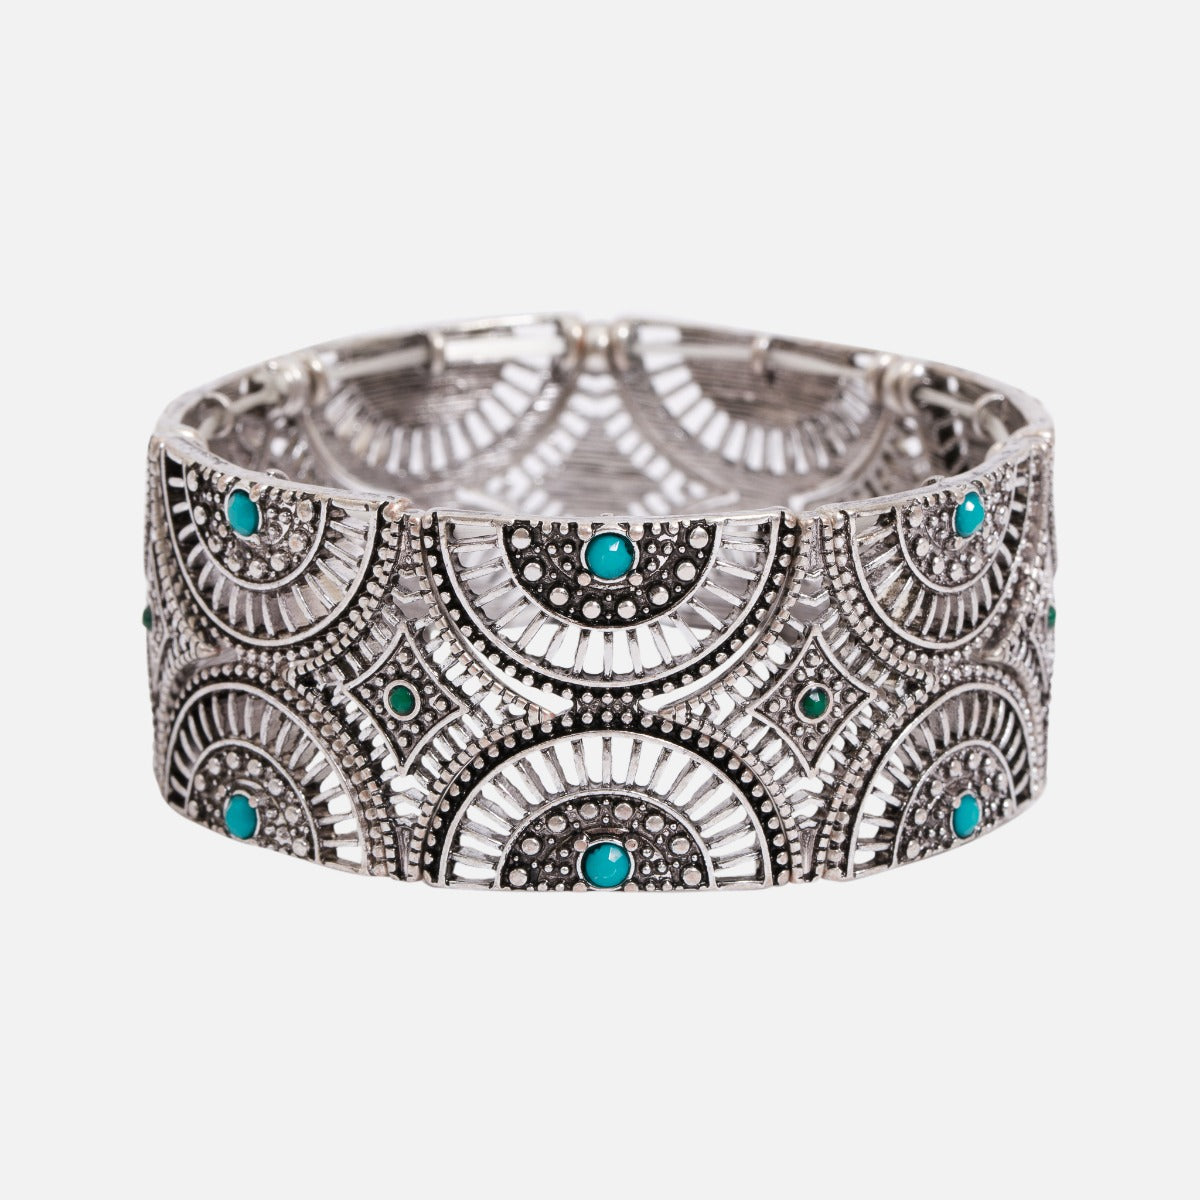 Wide bracelet with patterns and turquoise details